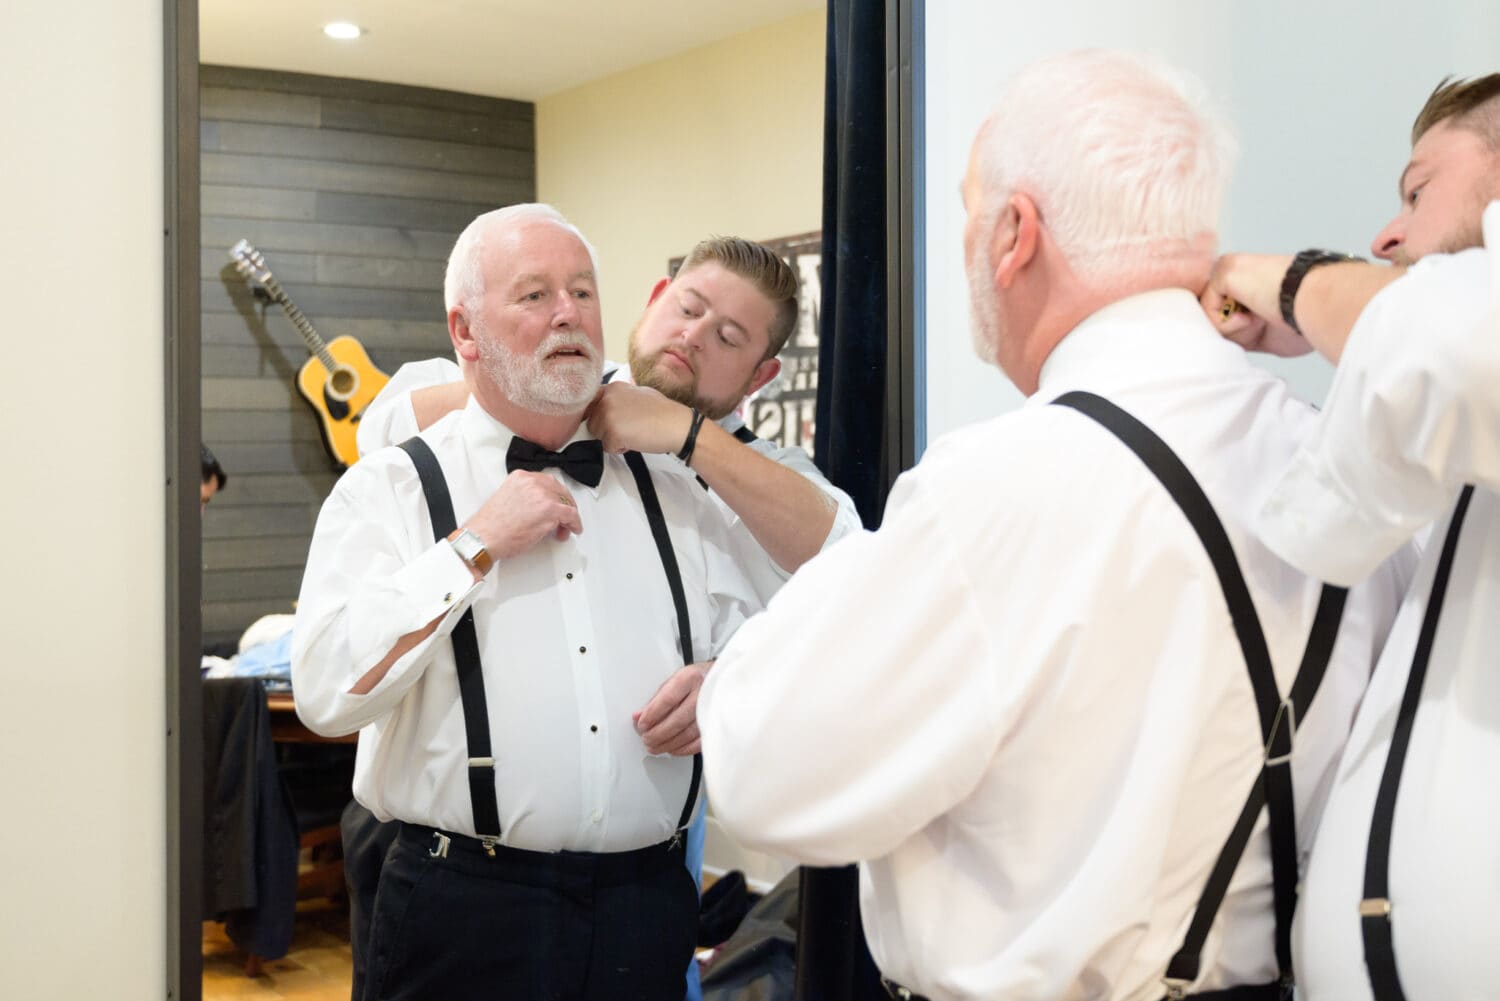 Groom helping dad with tie - by Lizeth Smith - The Venue at White Oaks Farm